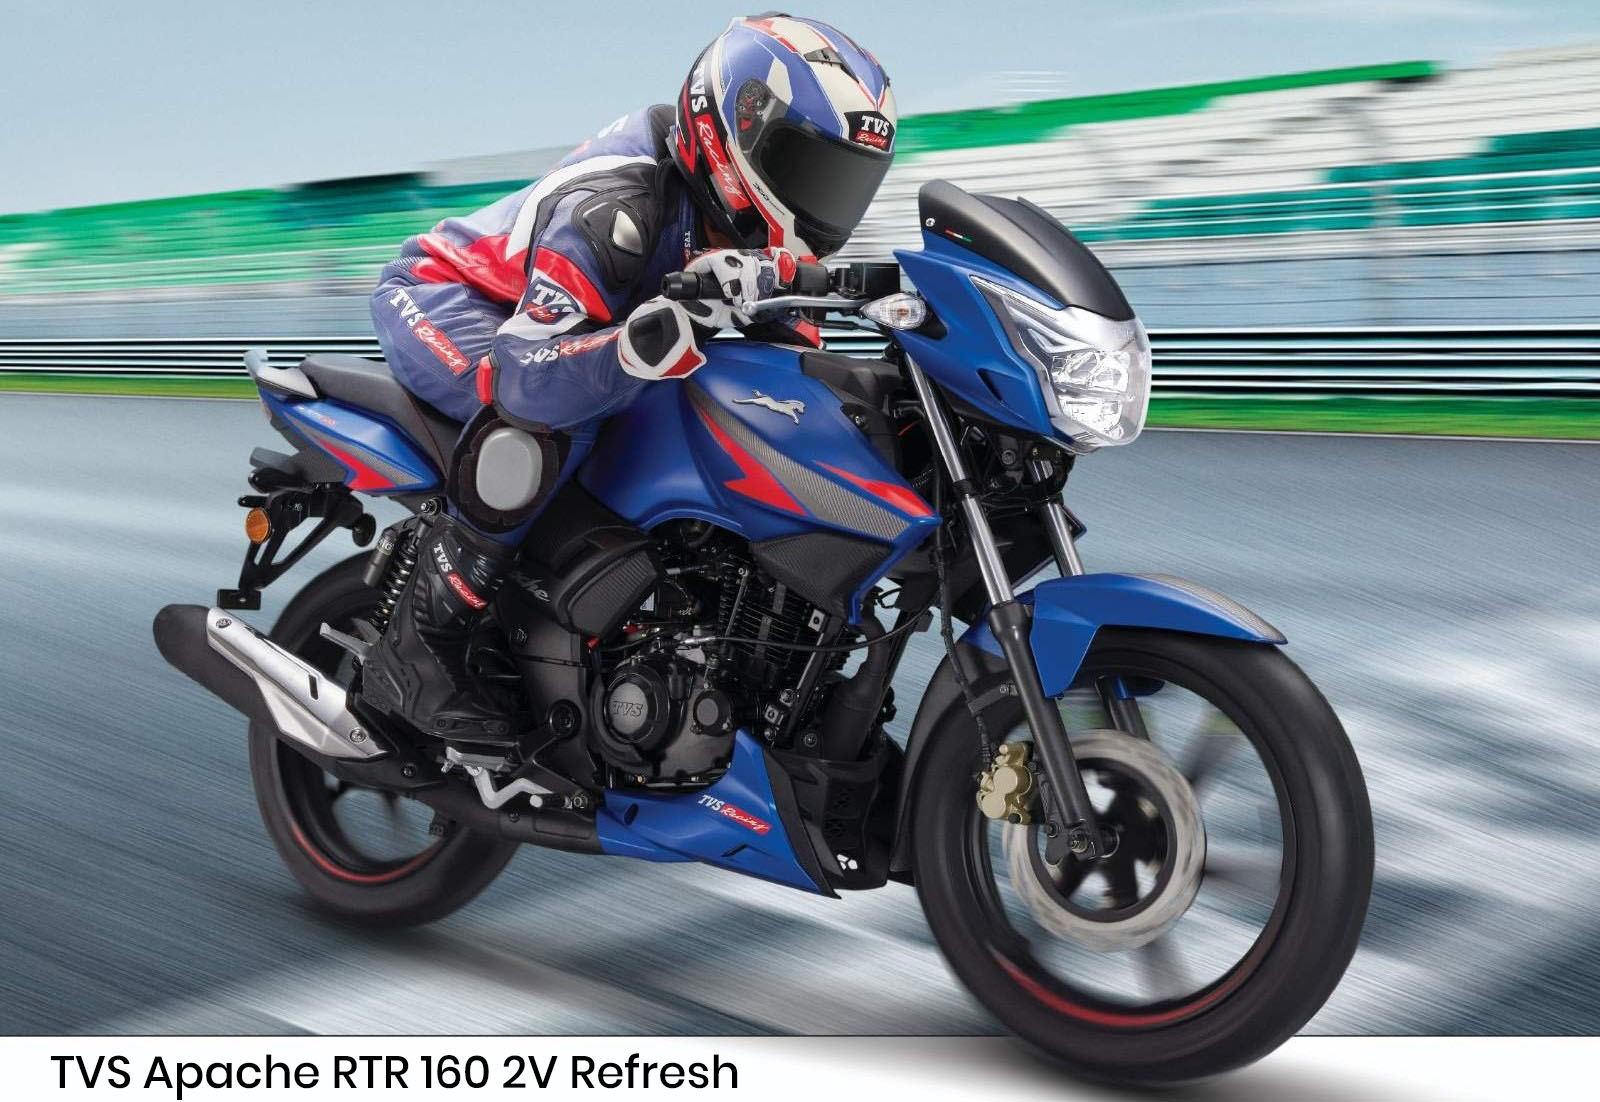 TVS Apache RTR 160 2V Refresh launched in Nepal